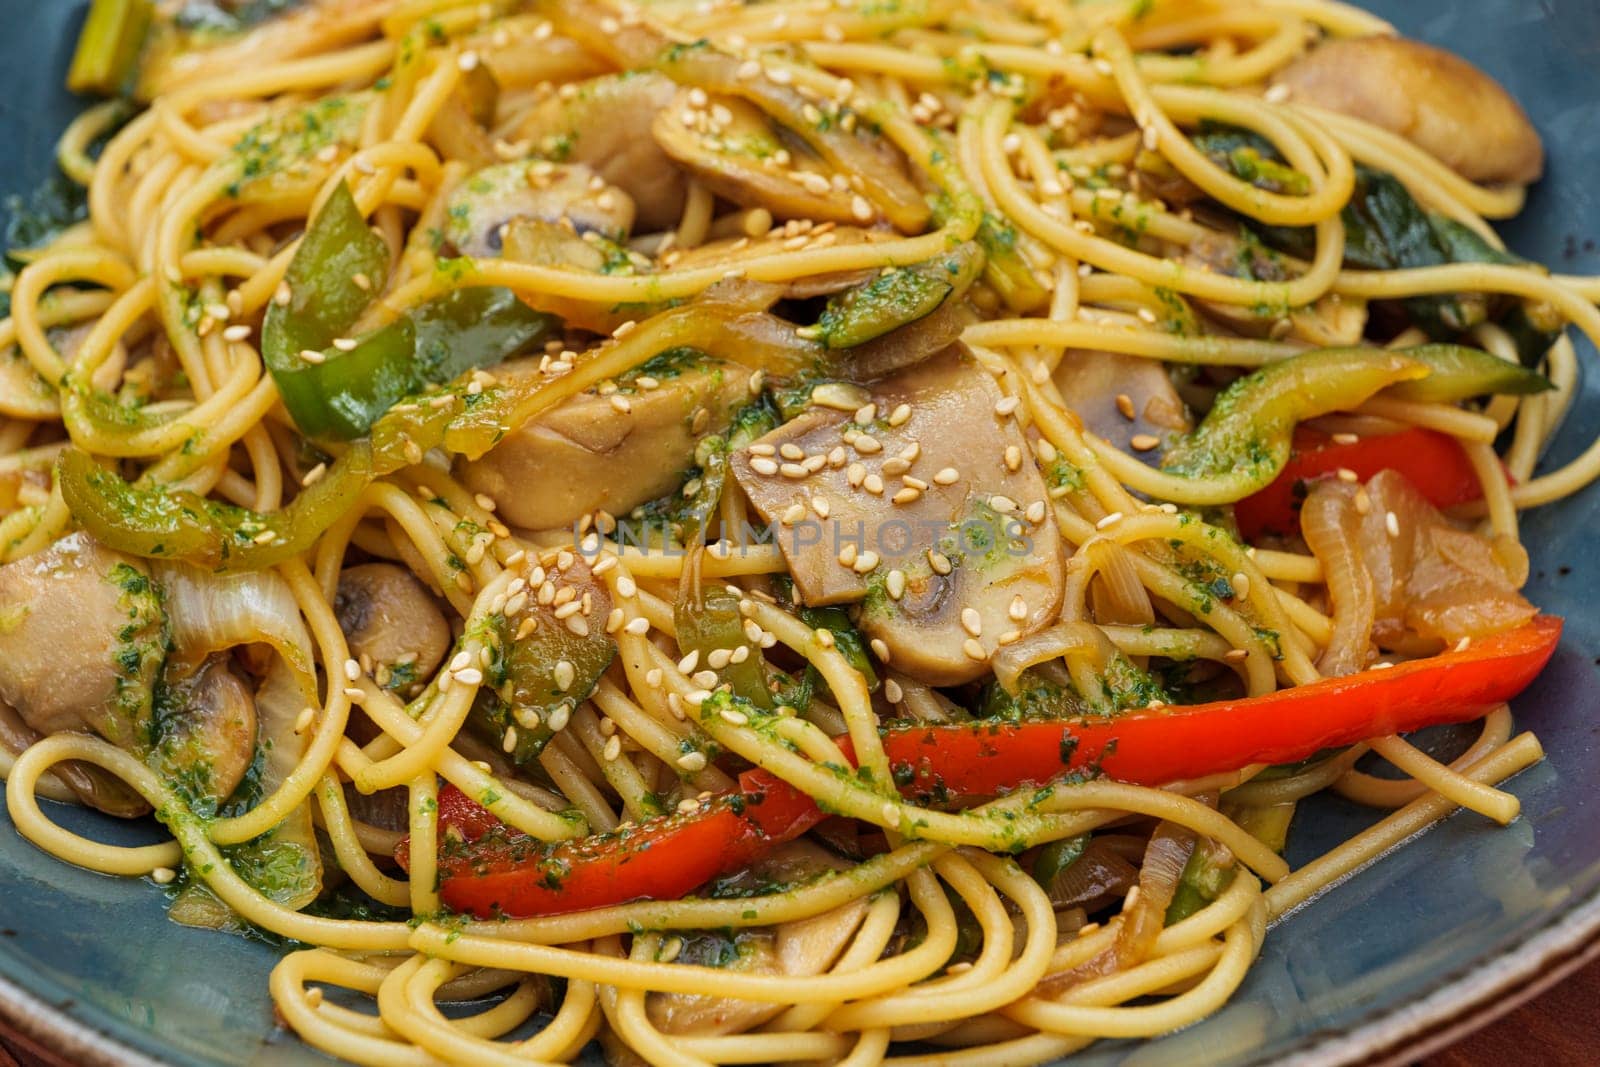 Spaghetti and vegetables wok with soy sauce. Close-up of restaurant dish